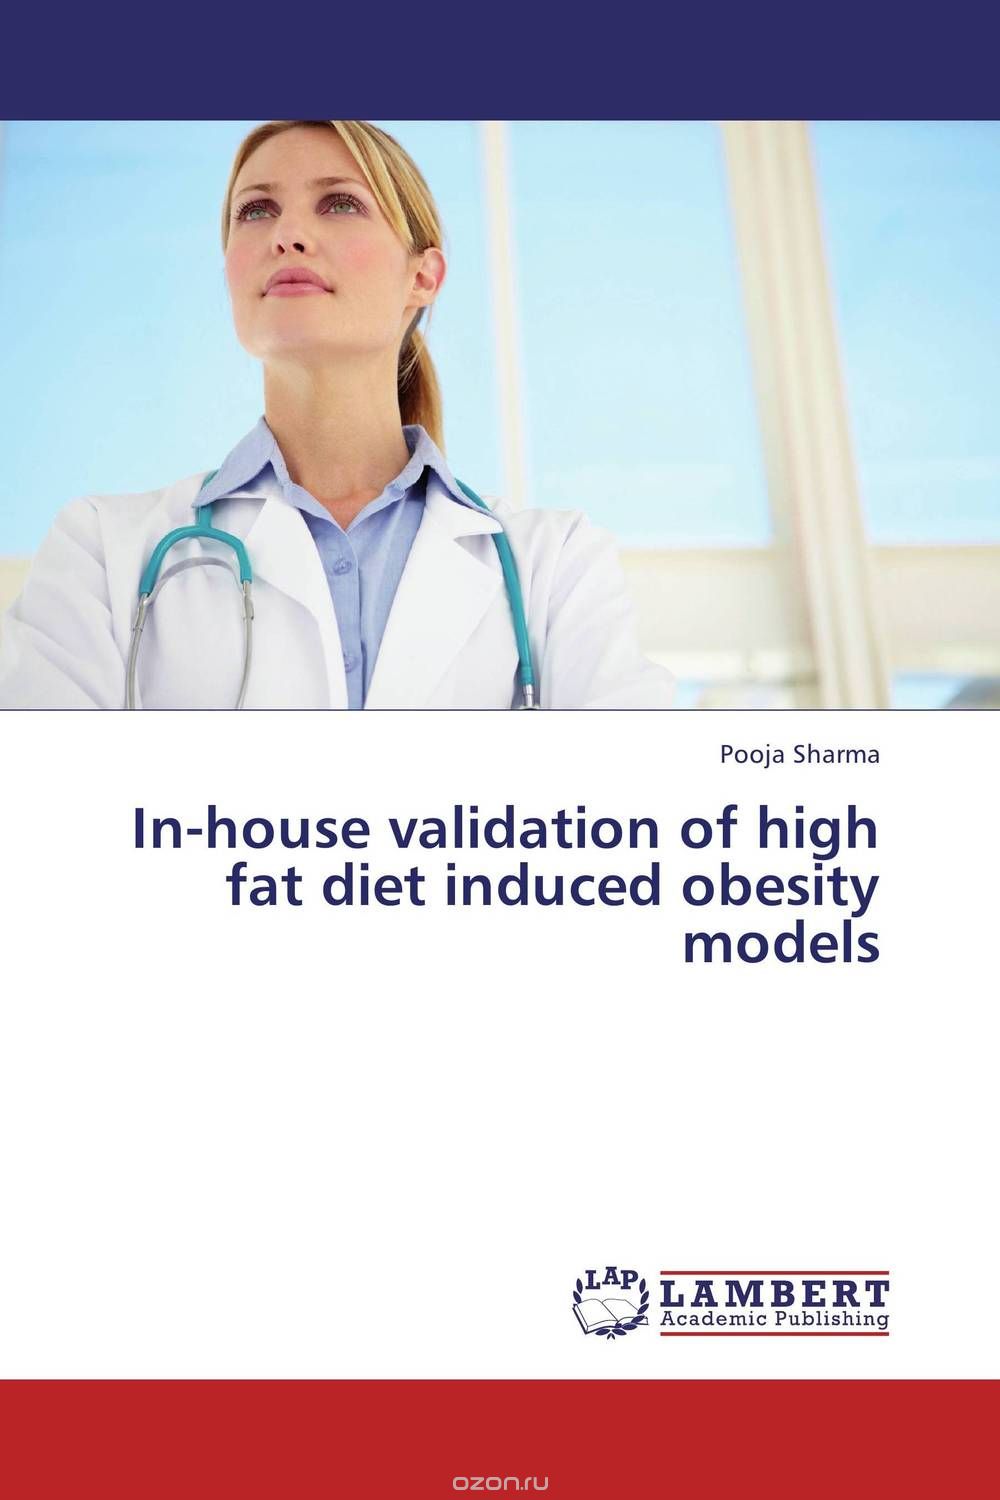 Скачать книгу "In-house validation of high fat diet induced obesity models"